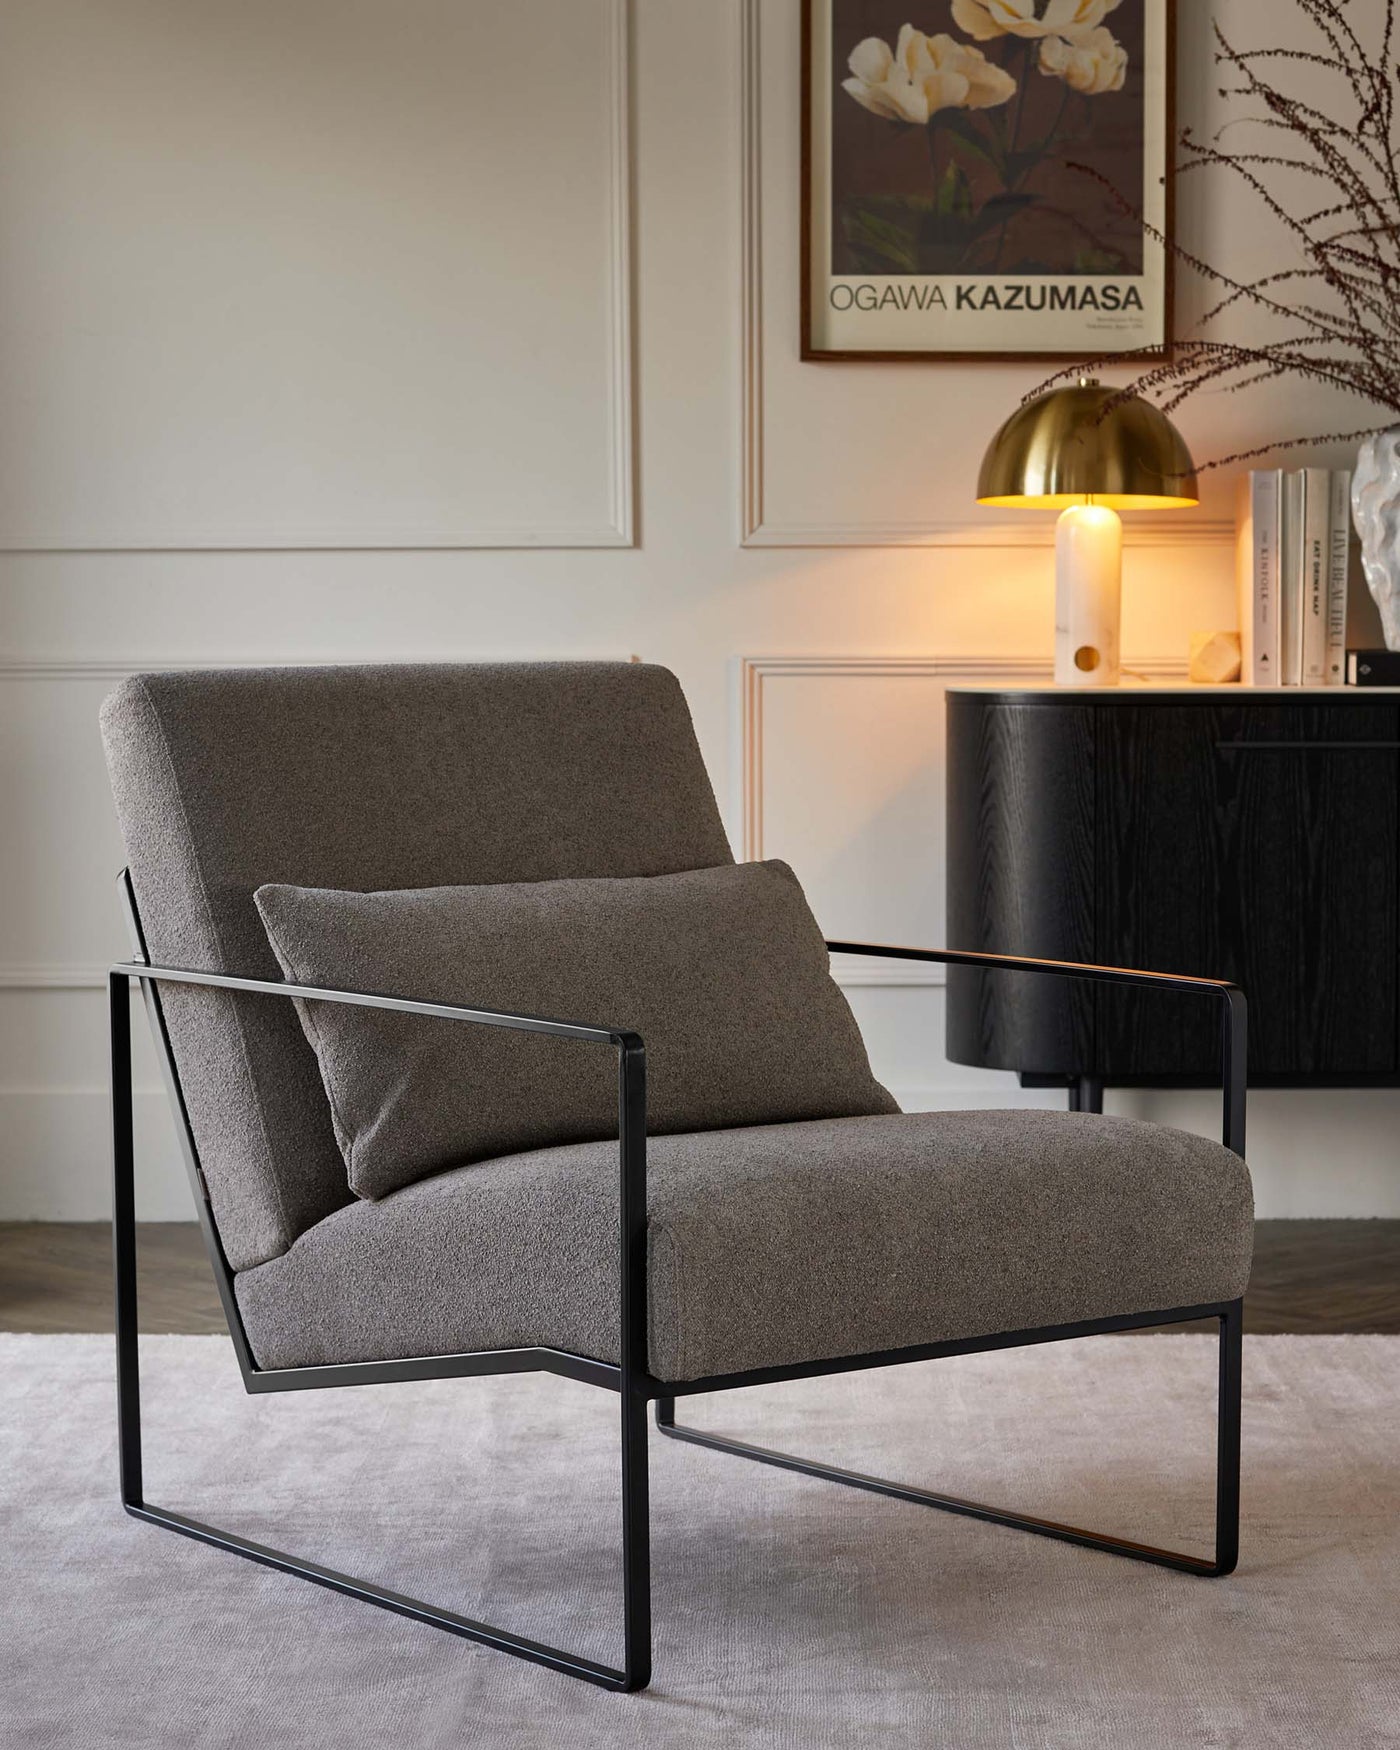 Modern minimalist armchair with a sleek black metal frame and comfortable heathered grey upholstery, positioned in a stylish interior setting beside a black cabinet with a brass-domed lamp and framed artwork on the wall.